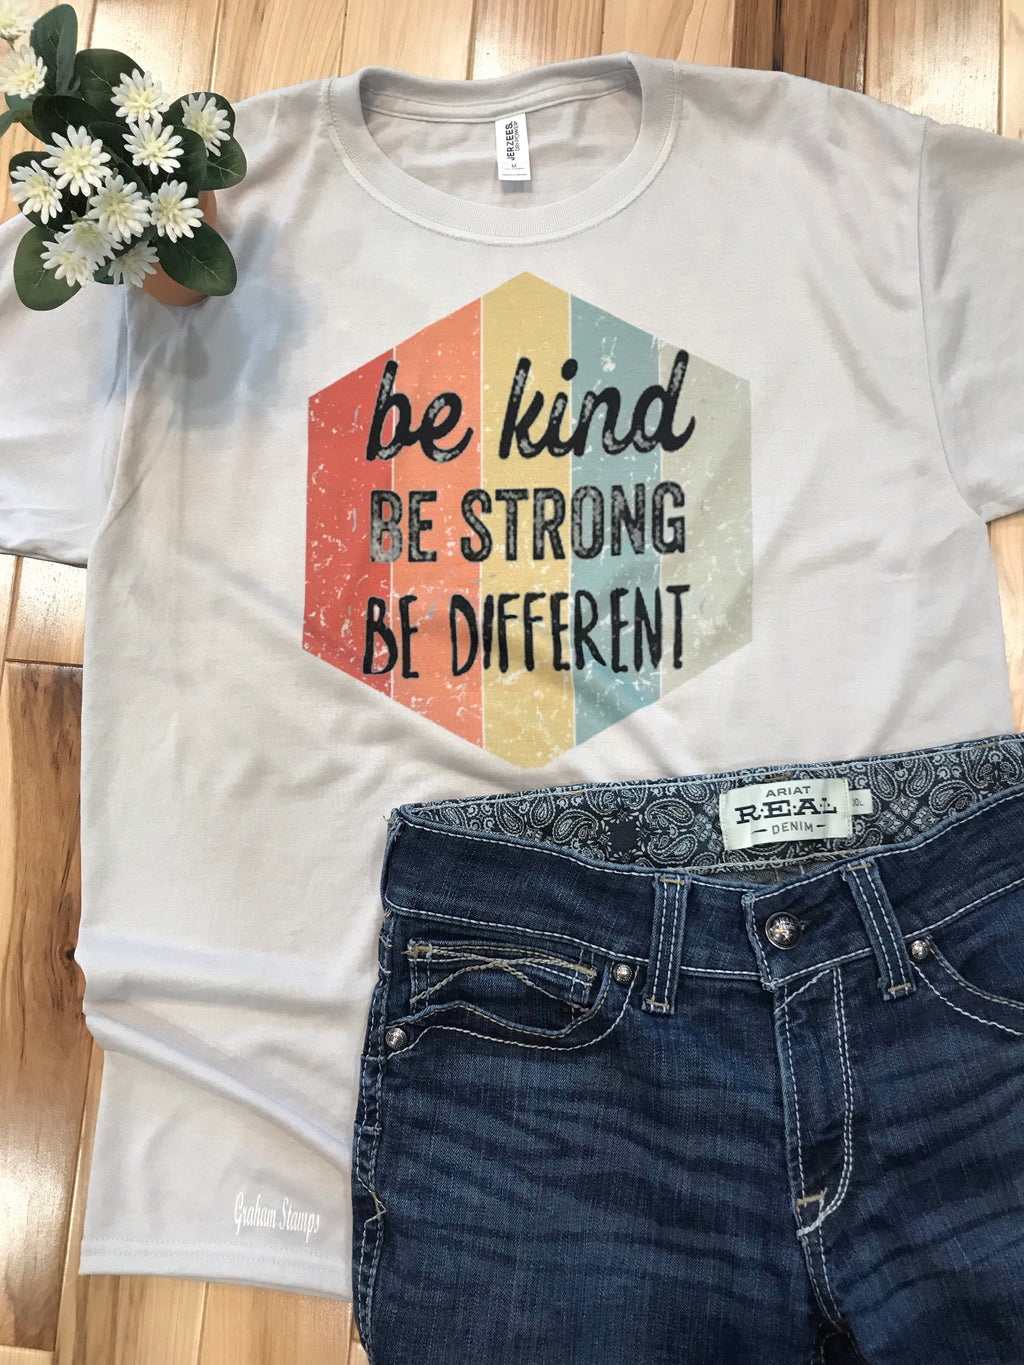 Be kind be strong be different